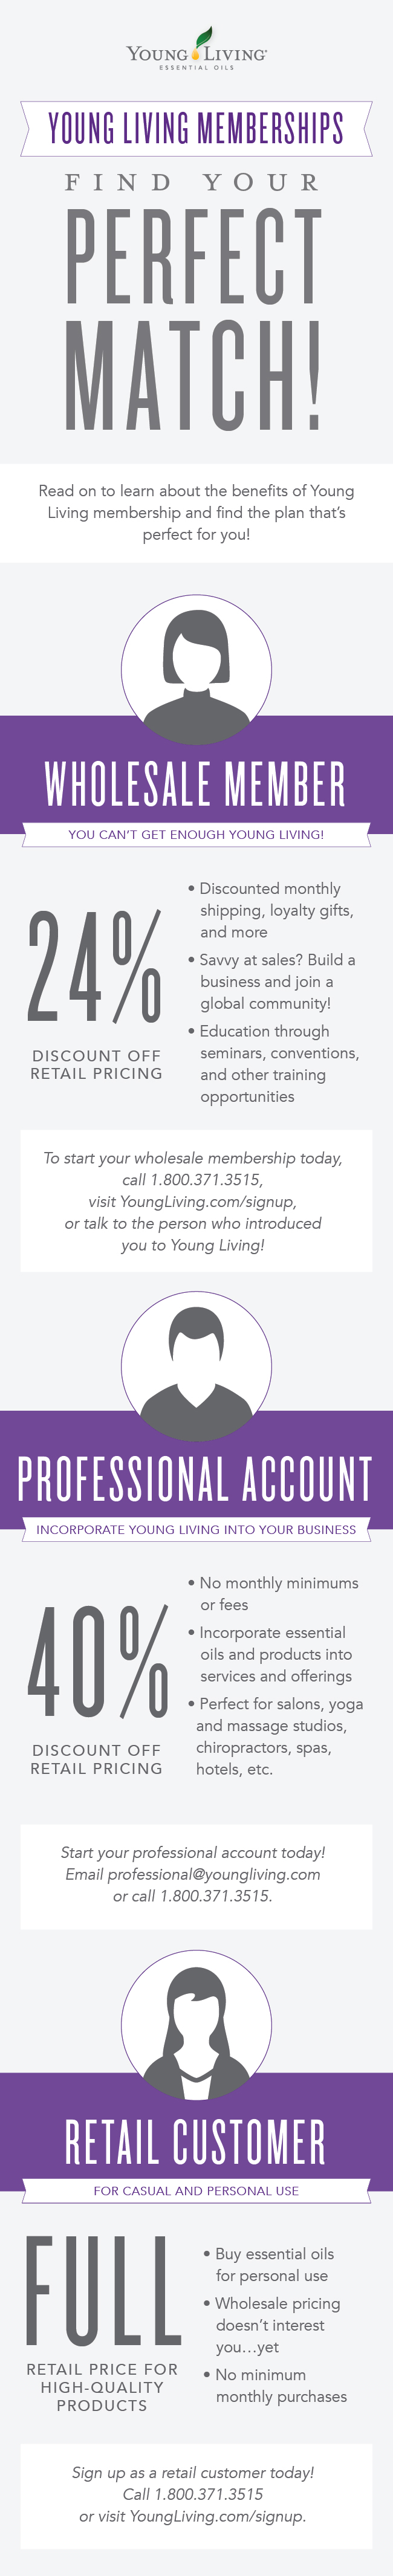 Young Living Membership Types